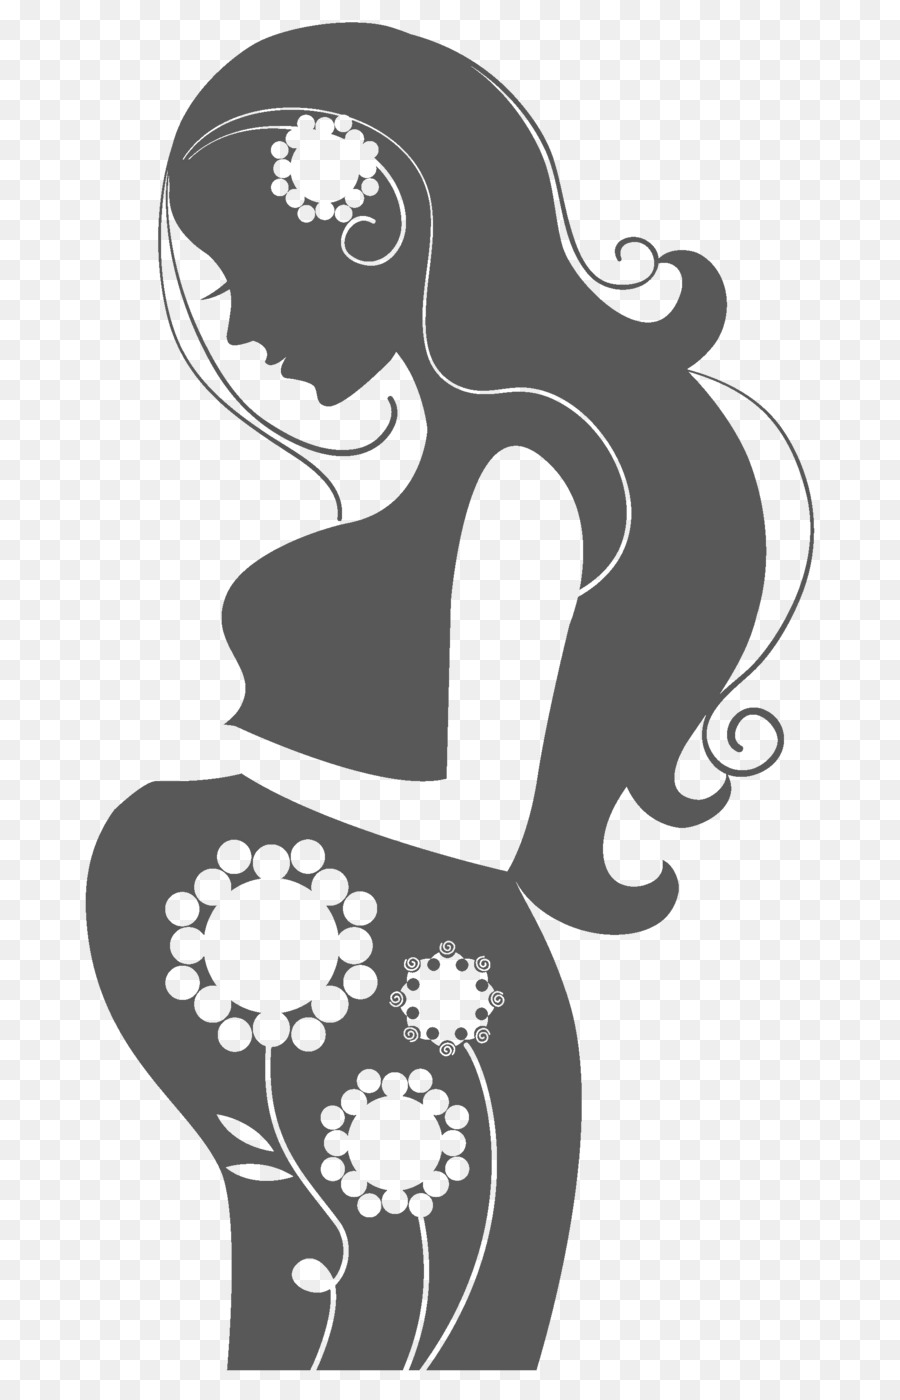 Pregnant Woman Silhouette Drawing - img-ultra